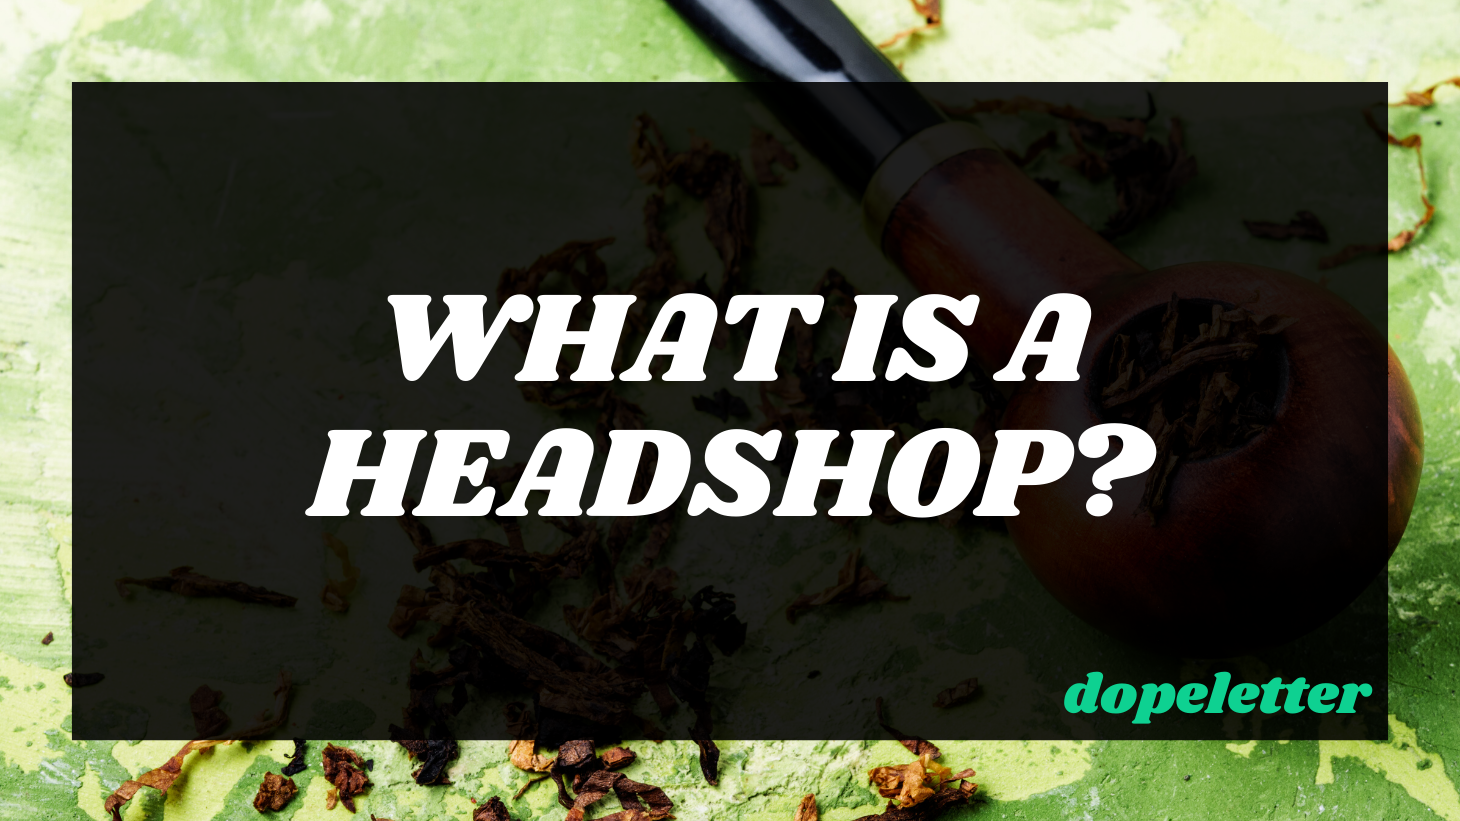 What is a Headshop?